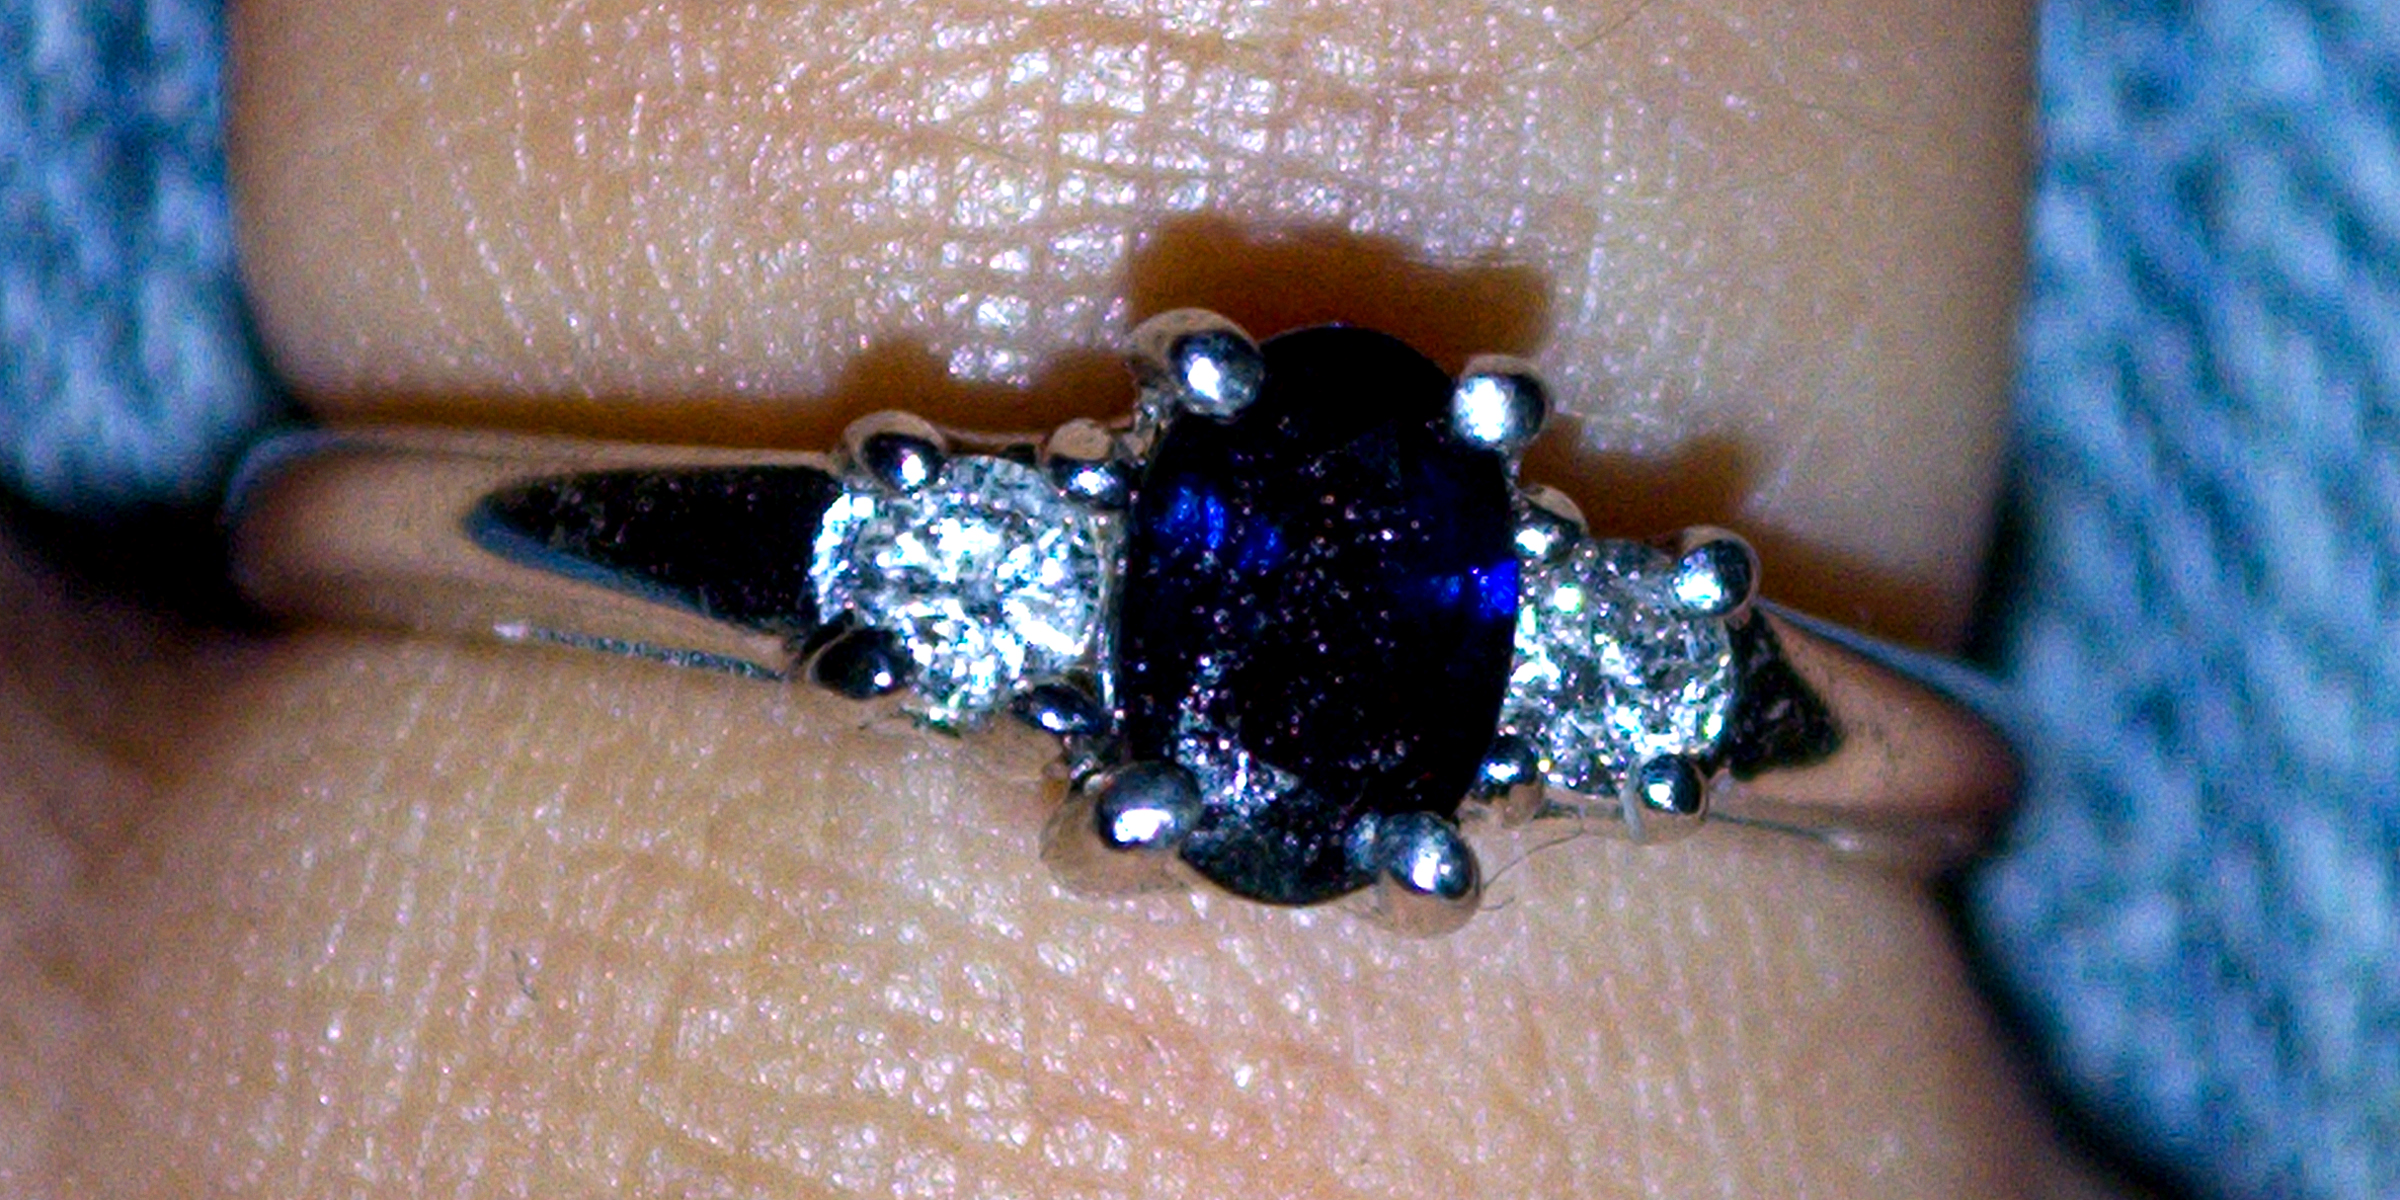 An engagement ring | Source: flickr.com/mikemol